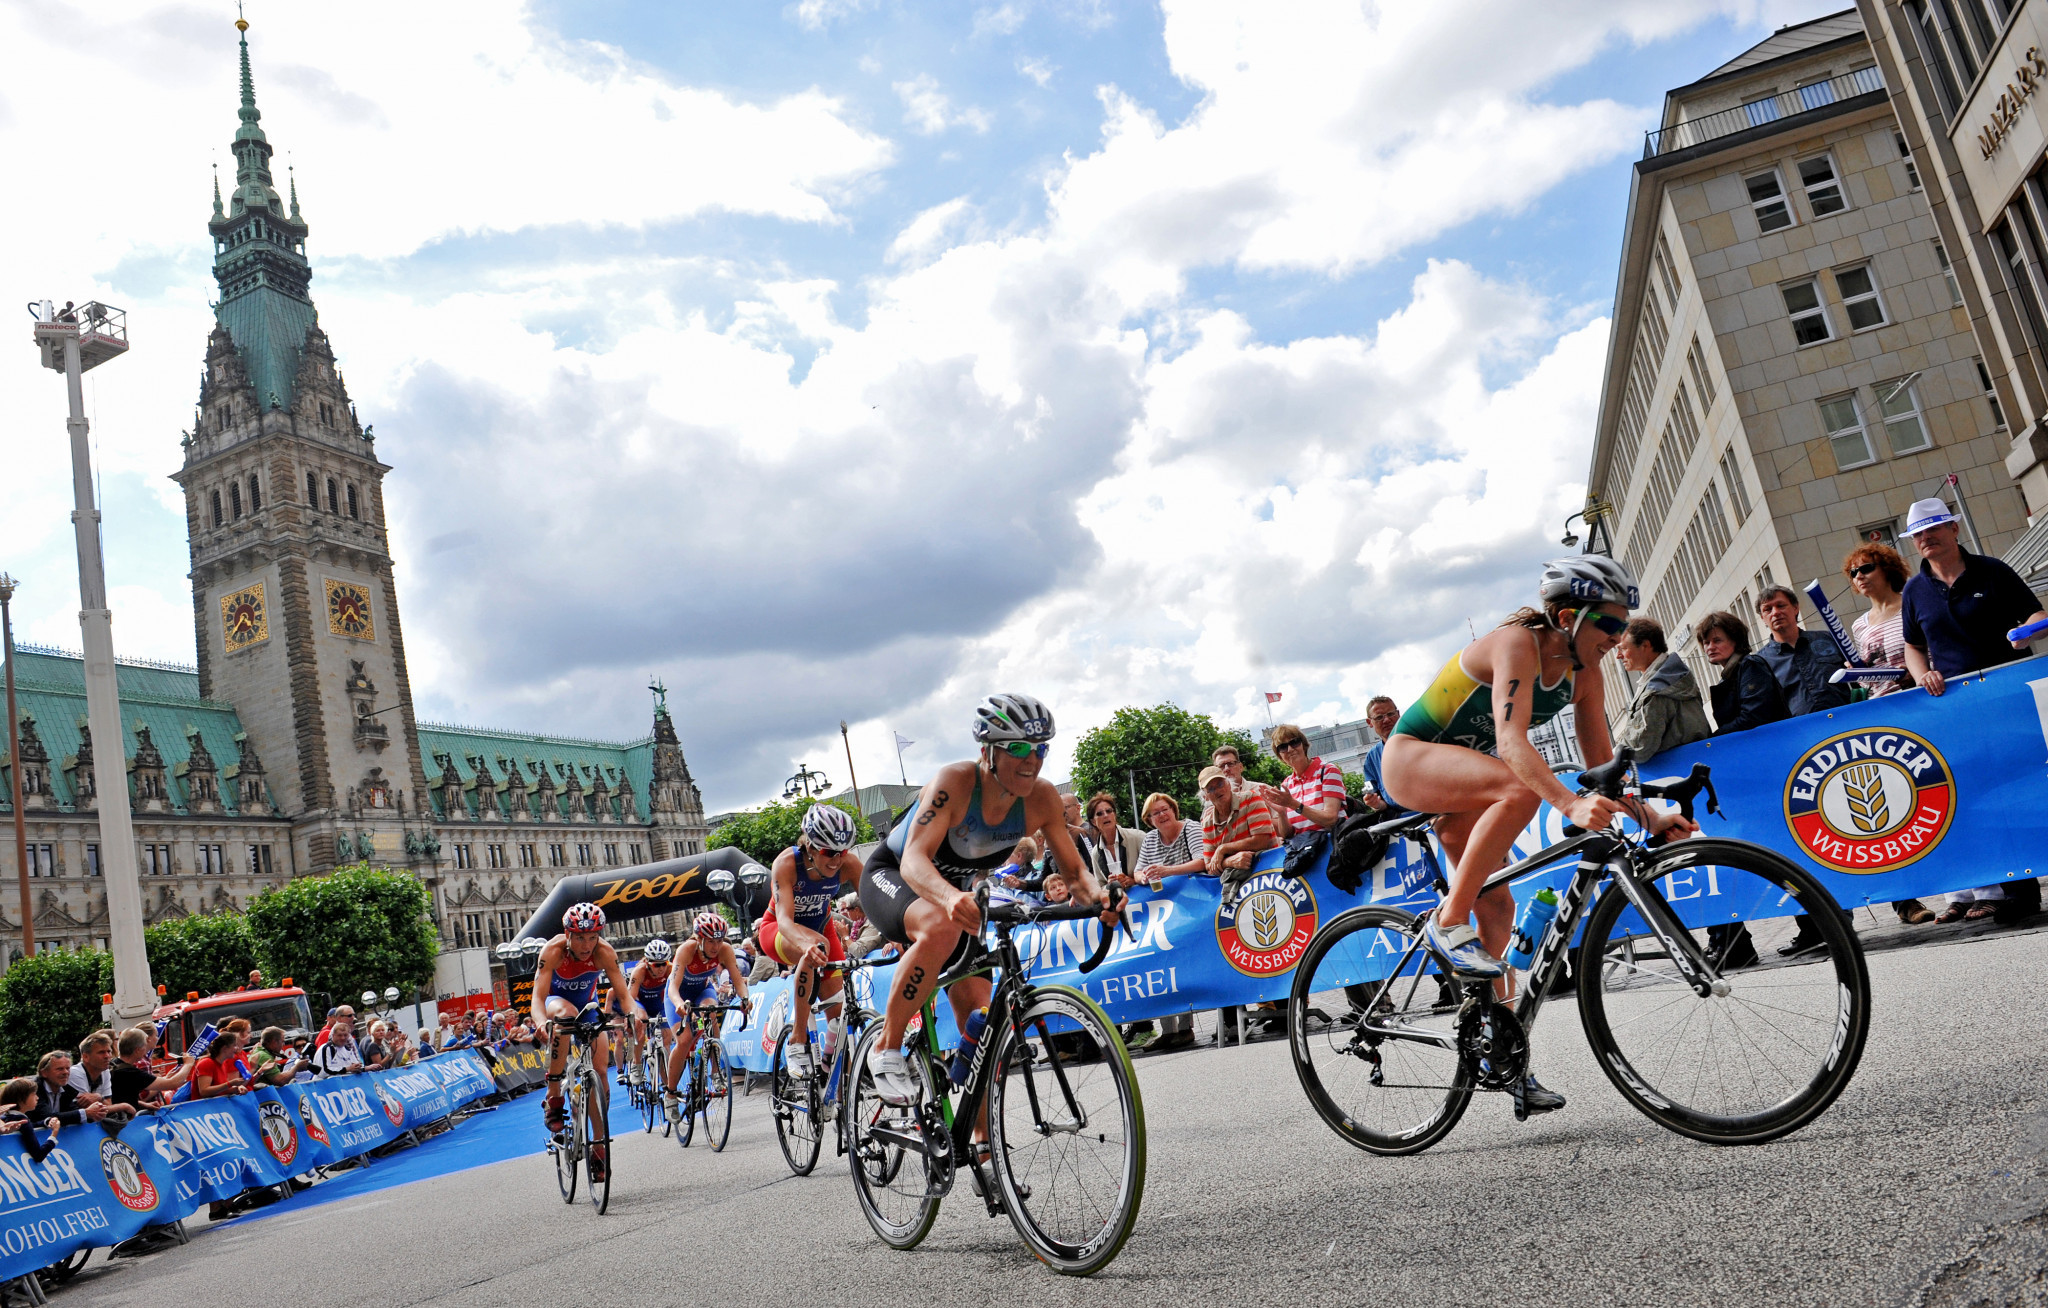 Hamburg is a long-standing venue for World Triathlon events ©Getty Images